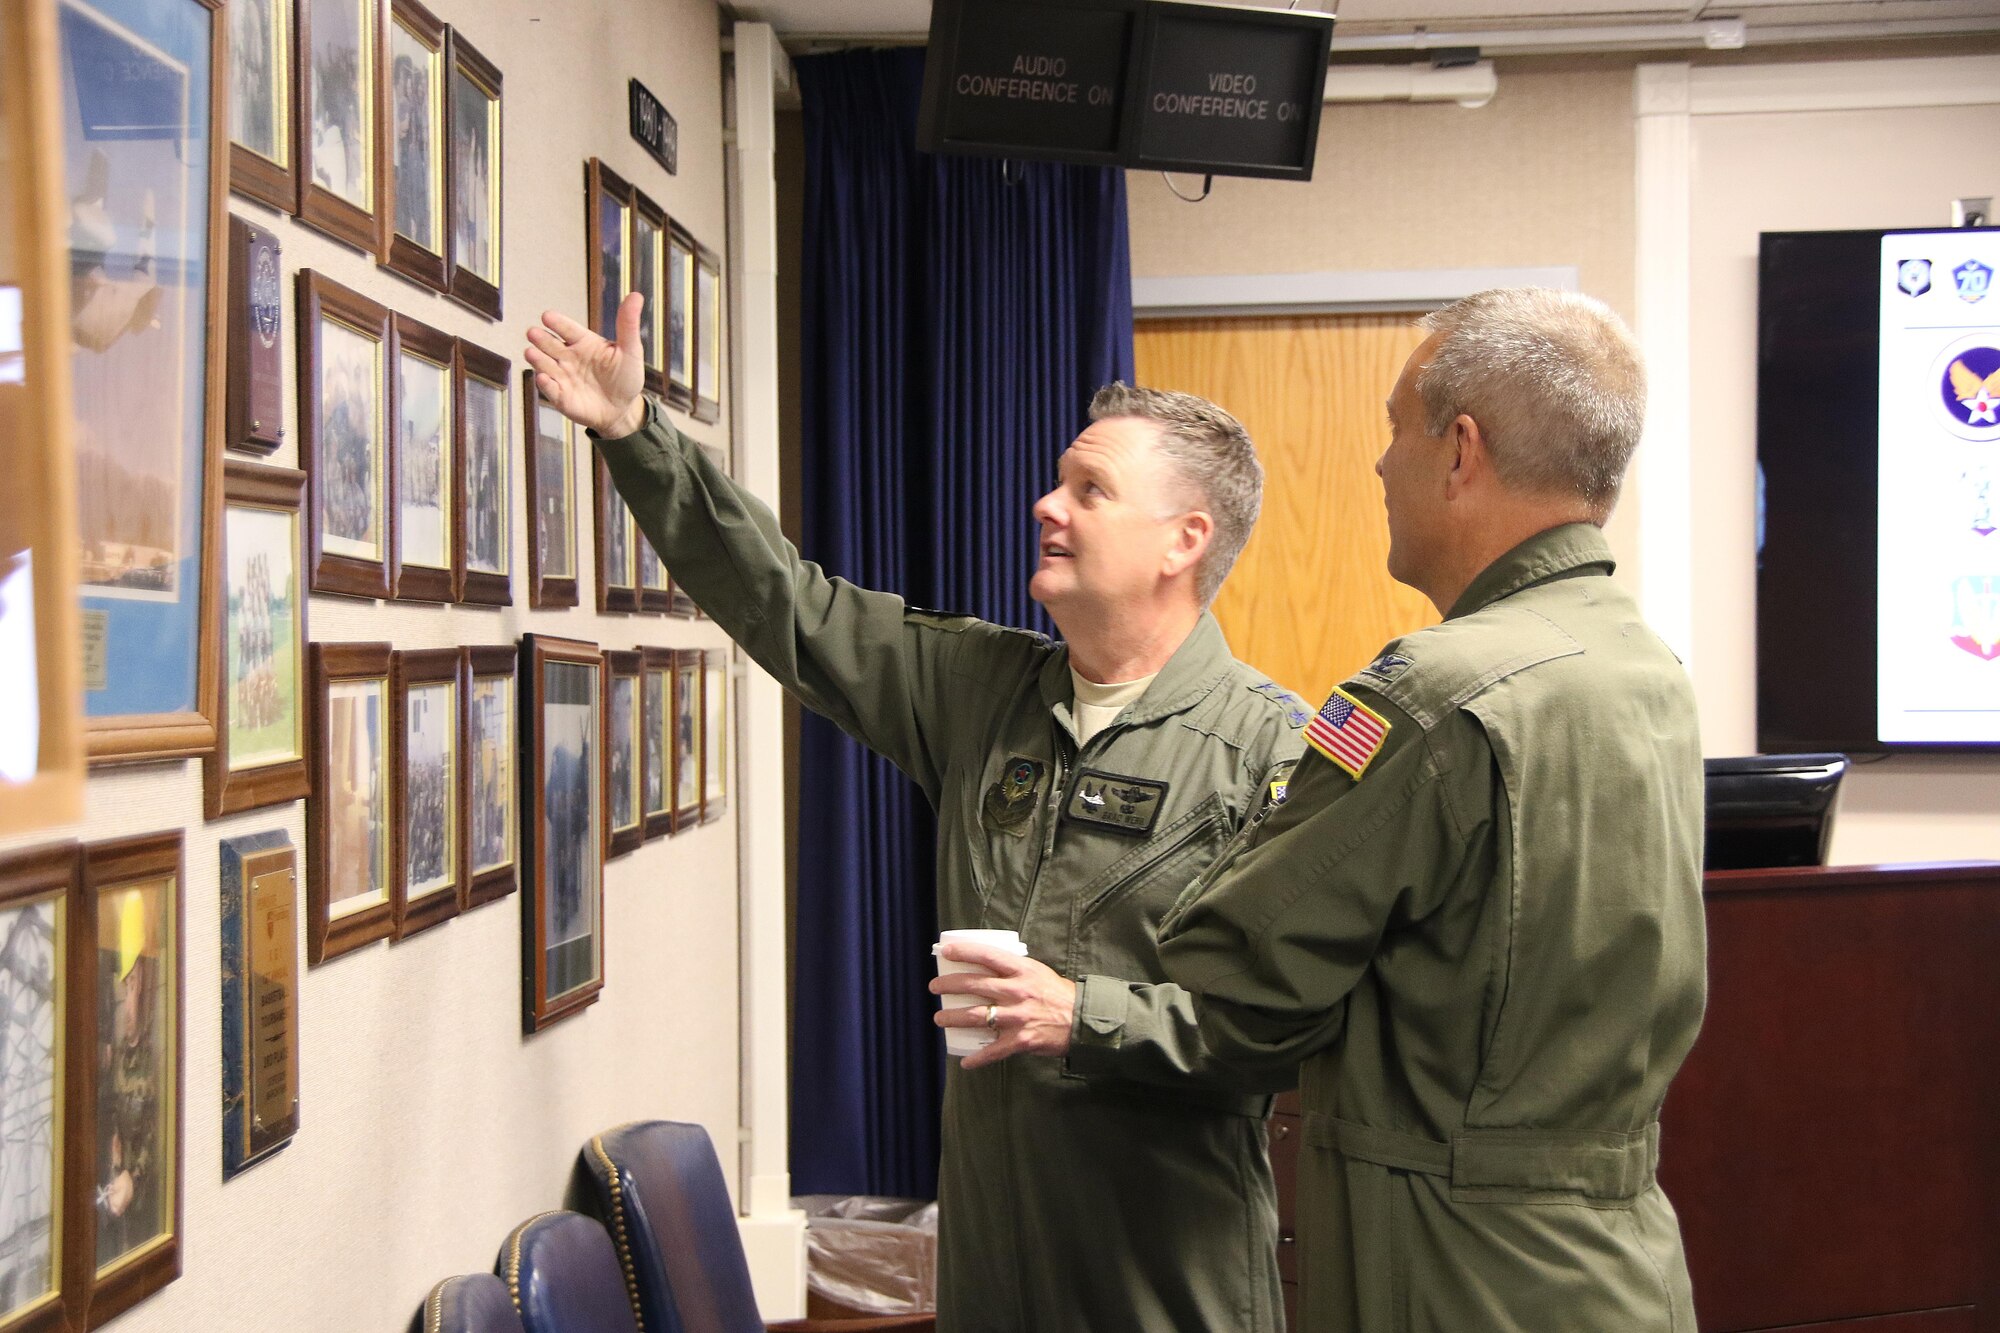 U.S. Air Force Lt. Gen. Brad Webb, commander of Air Force Special Operations Command, left, talks with 193rd Special Operations Wing Commander, Col. Benjamin “Mike” Cason, about the 193rd SOW’s heritage prior to a briefing at Middletown, Pennsylvania, June 10, 2017. Webb met with Airmen and wing leaders, and toured the base including the 193rd Air Operations Group at State College, Pennsylvania. He also recognized award winners during a wing “All Call.” (U.S. Air National Guard photo by Master Sgt. Culeen Shaffer/Released)